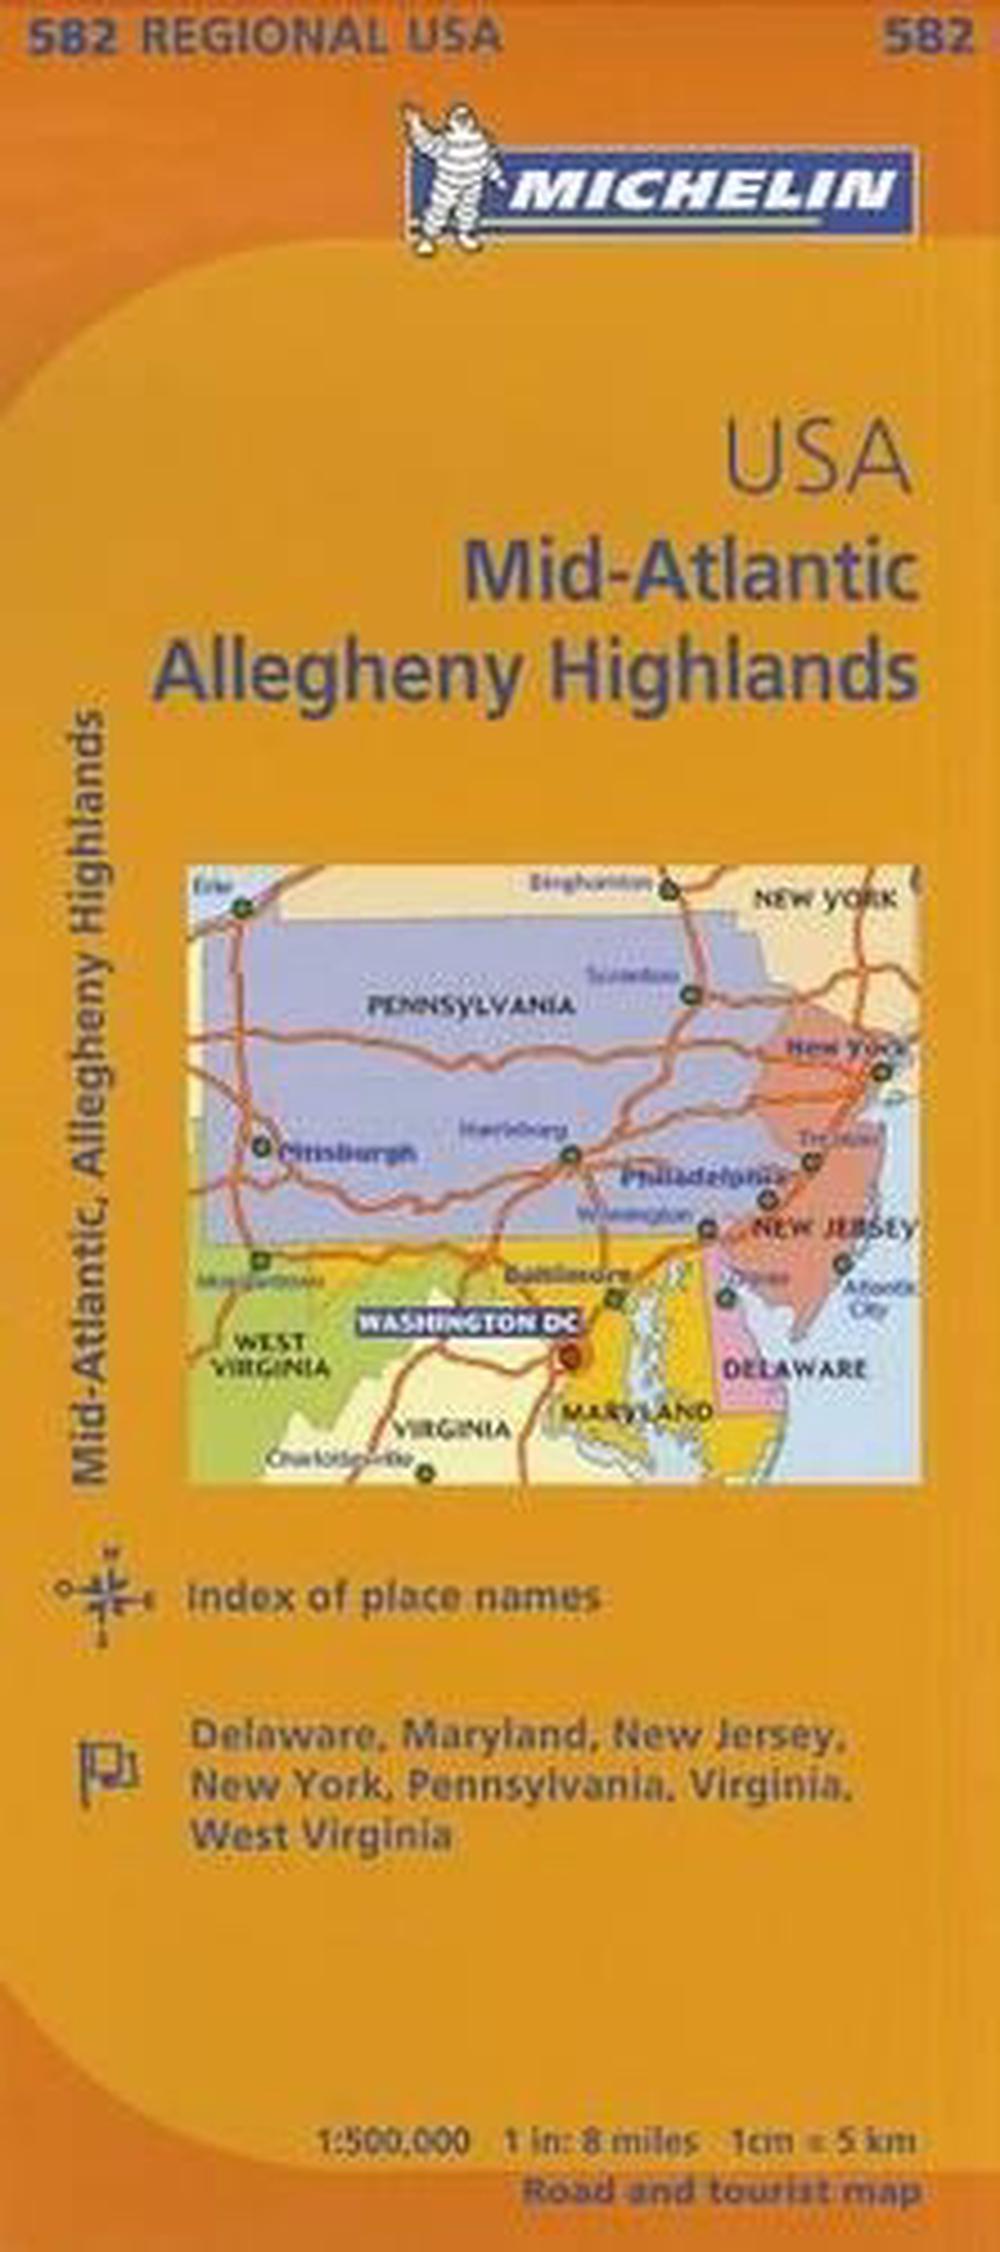 Michelin USA: Mid-Atlantic, Allegheny Highlands Map 582 by Michelin Travel &amp; Lif